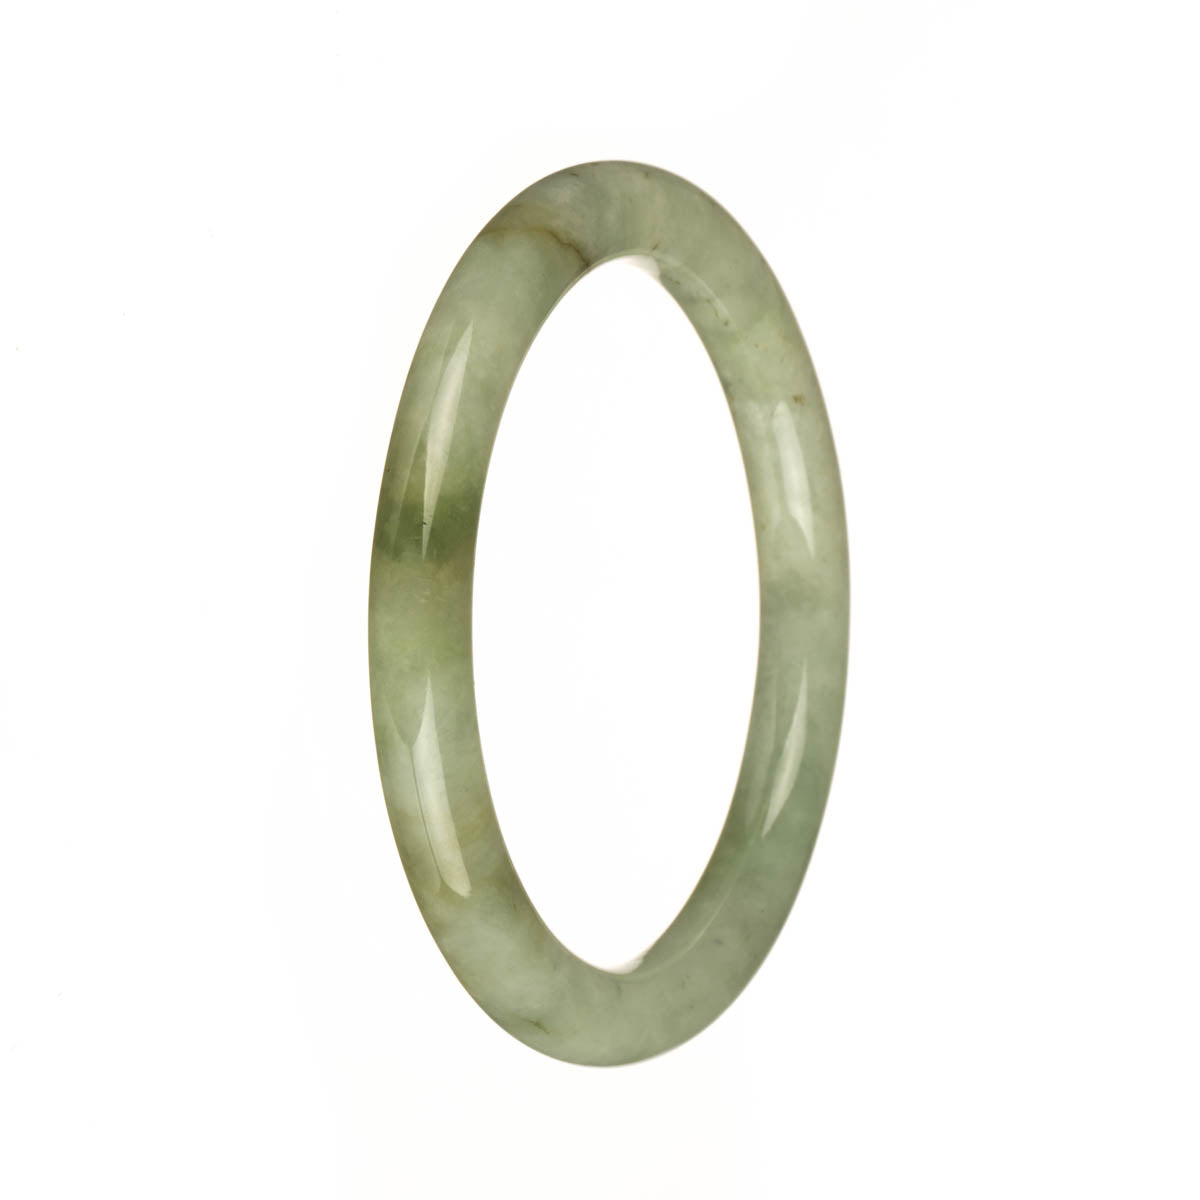 Genuine Grade A Pale Green with Apple Green and Brown Patches Jadeite Jade Bracelet - 55mm Petite Round